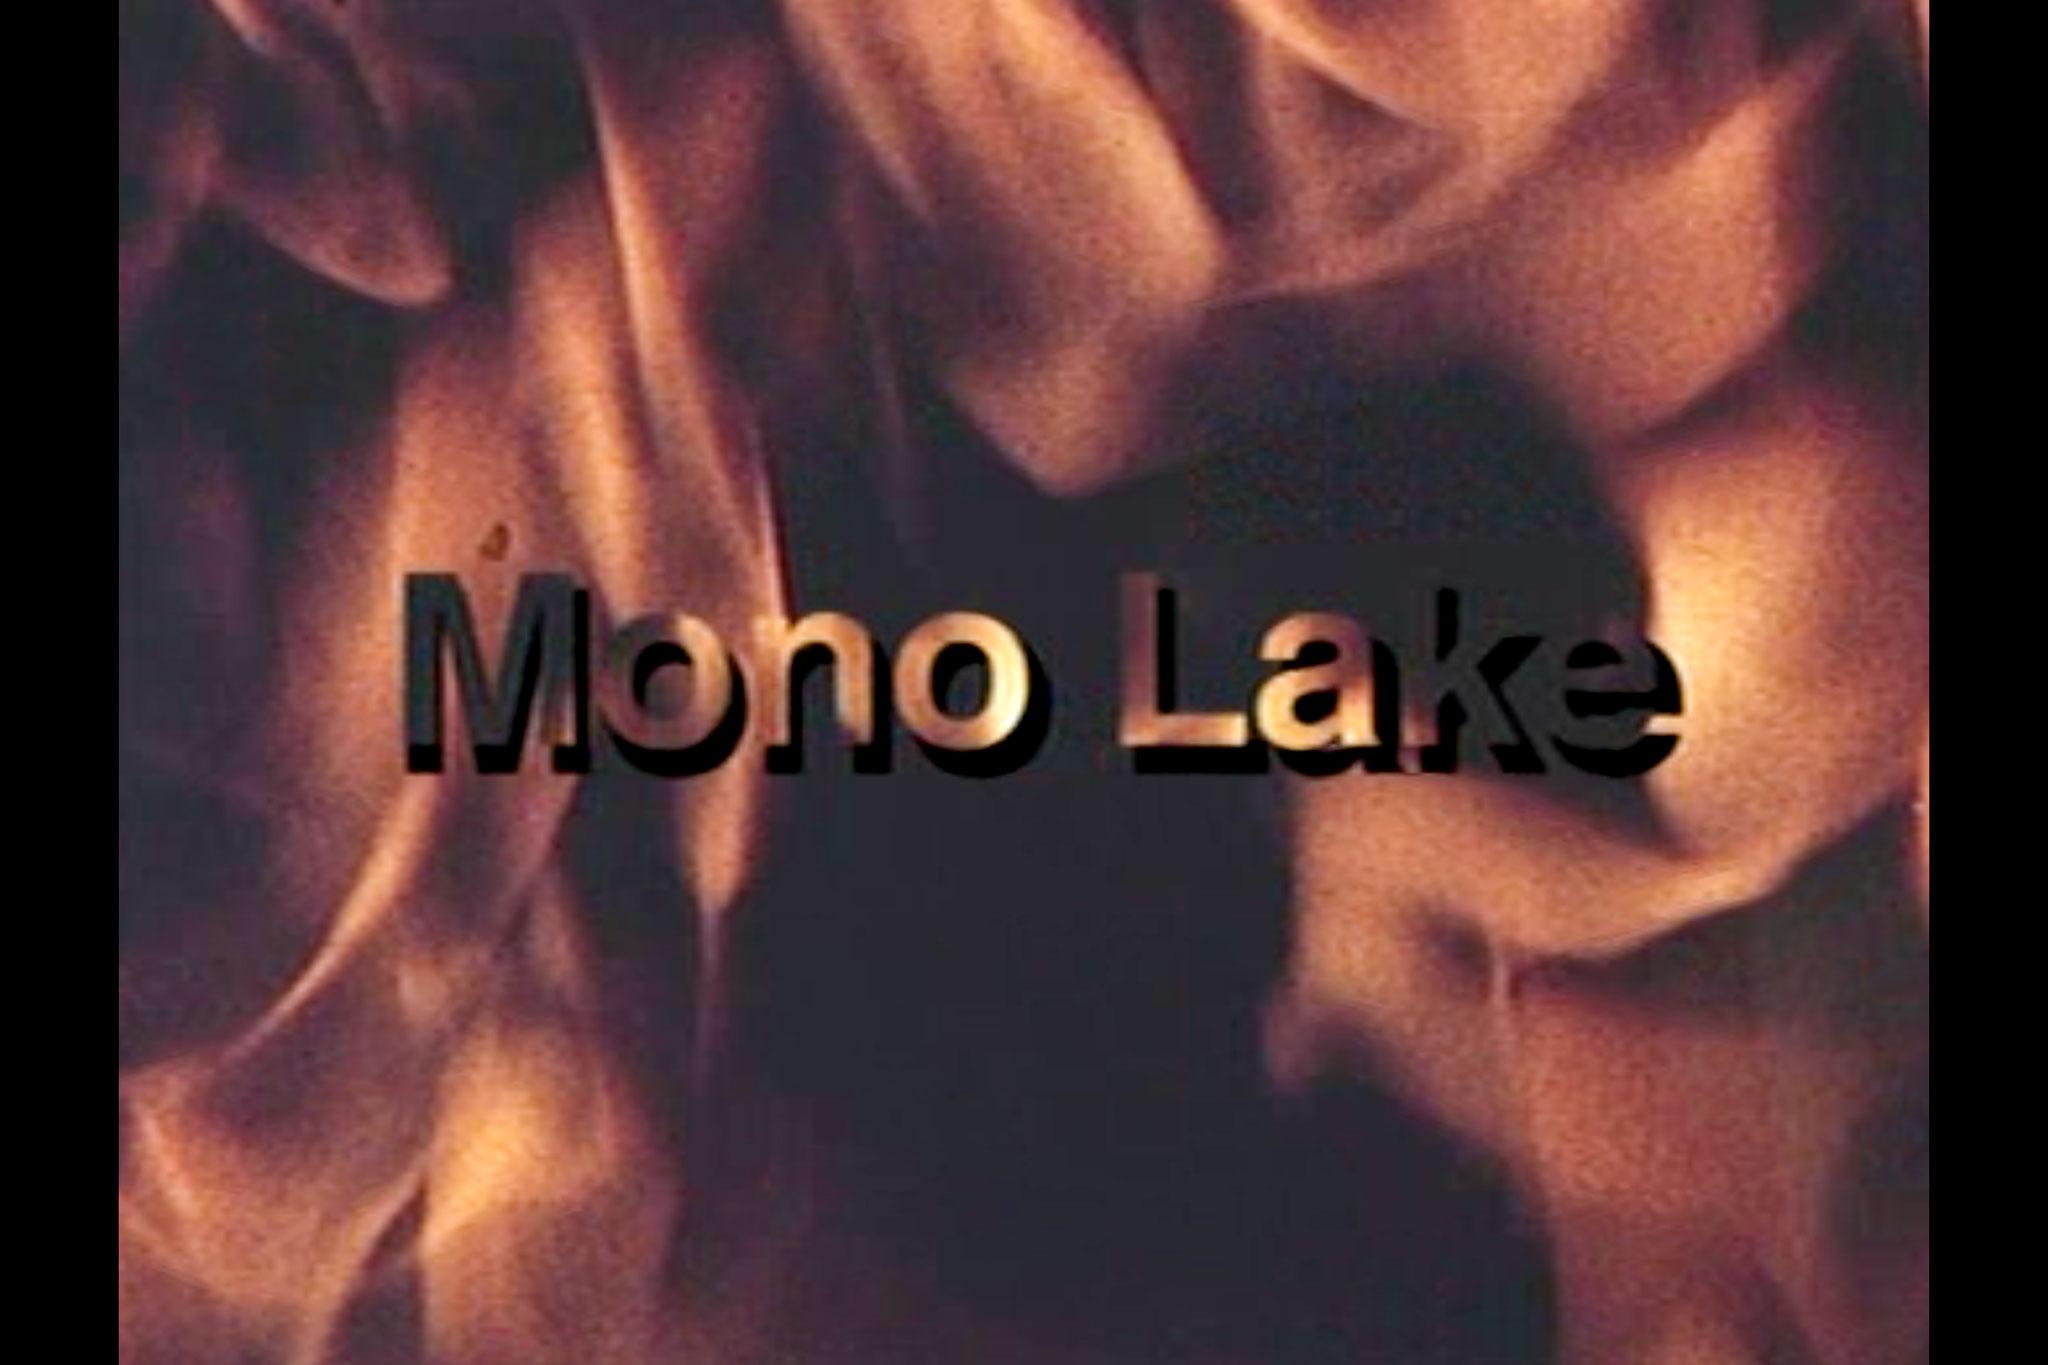 A title text for the film Mono Lake over a flaming background